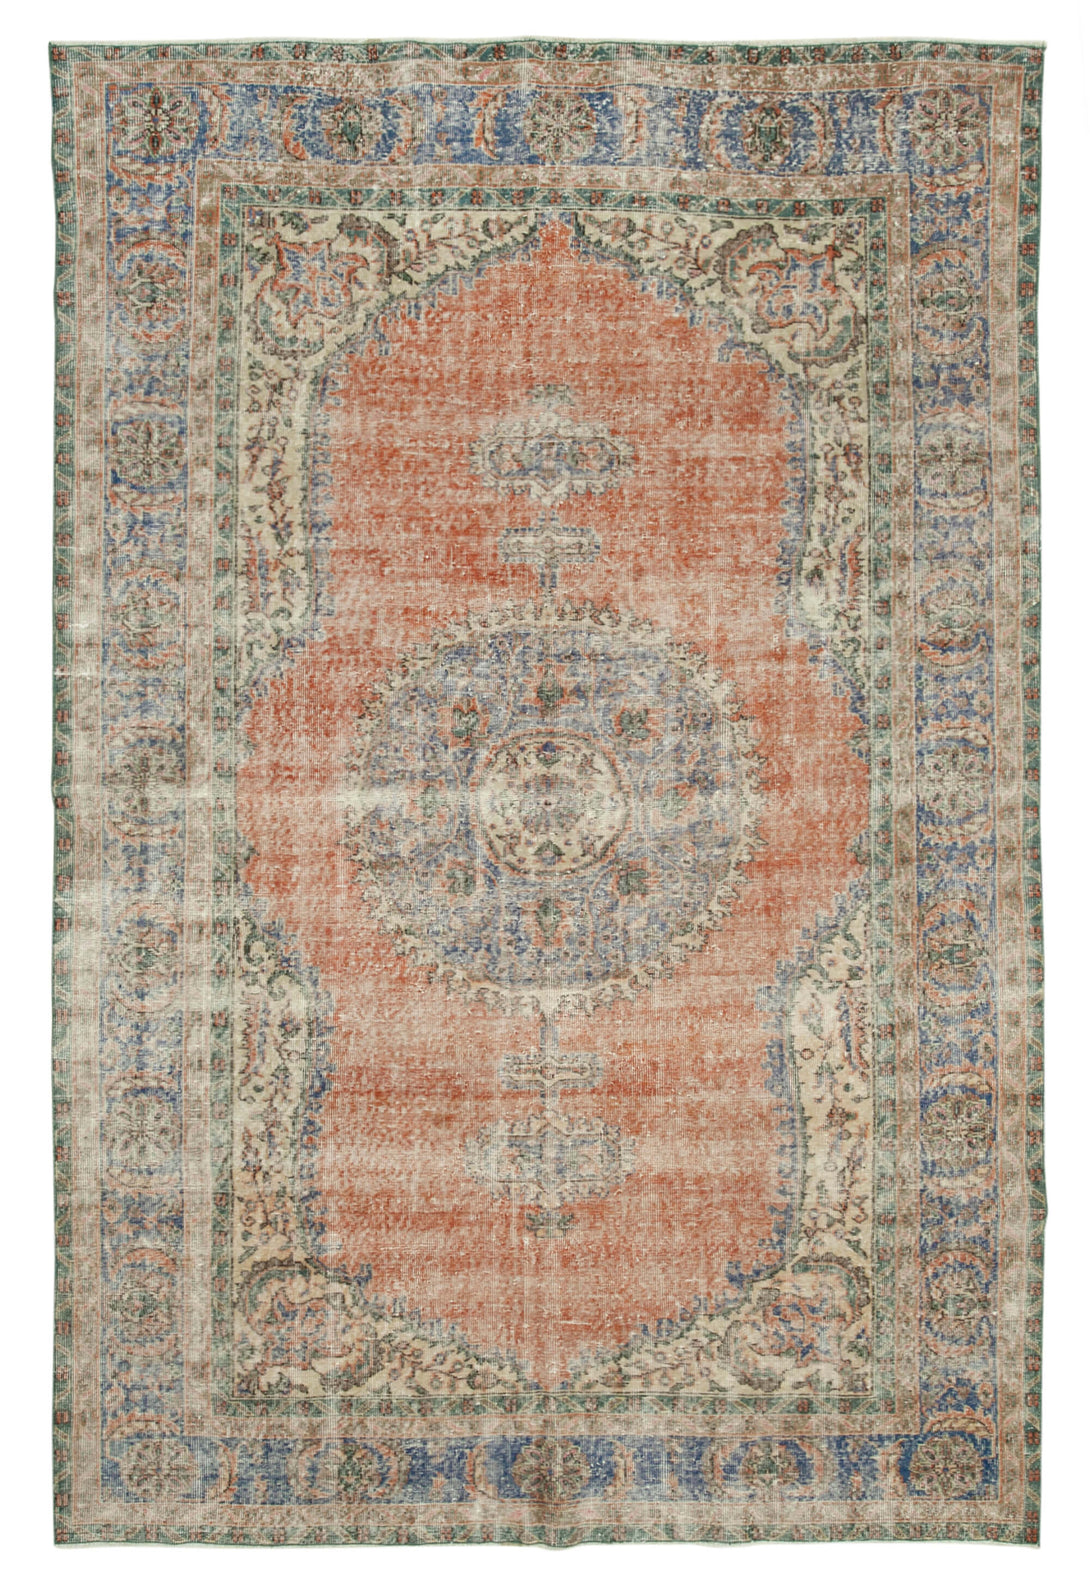 Handmade White Wash Area Rug > Design# OL-AC-36900 > Size: 7'-1" x 10'-9", Carpet Culture Rugs, Handmade Rugs, NYC Rugs, New Rugs, Shop Rugs, Rug Store, Outlet Rugs, SoHo Rugs, Rugs in USA